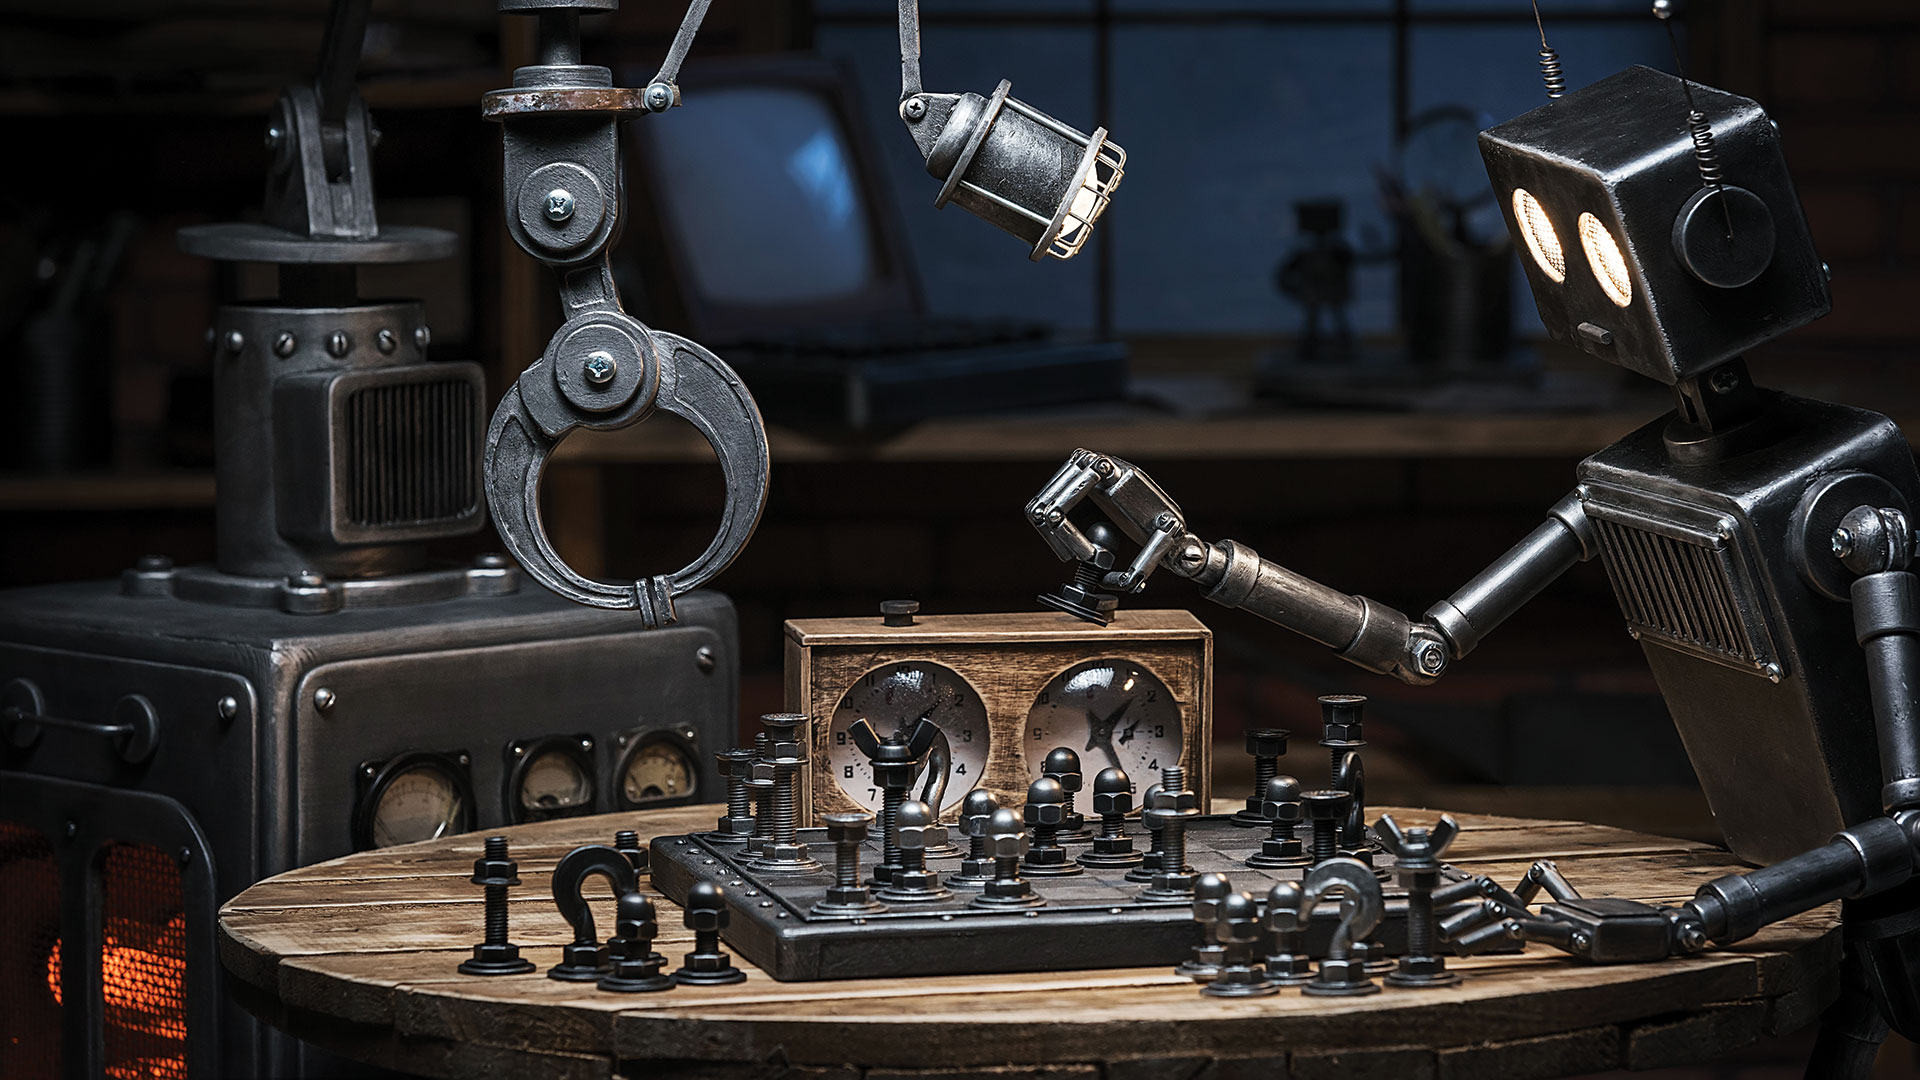 Two robots playing a game of chess